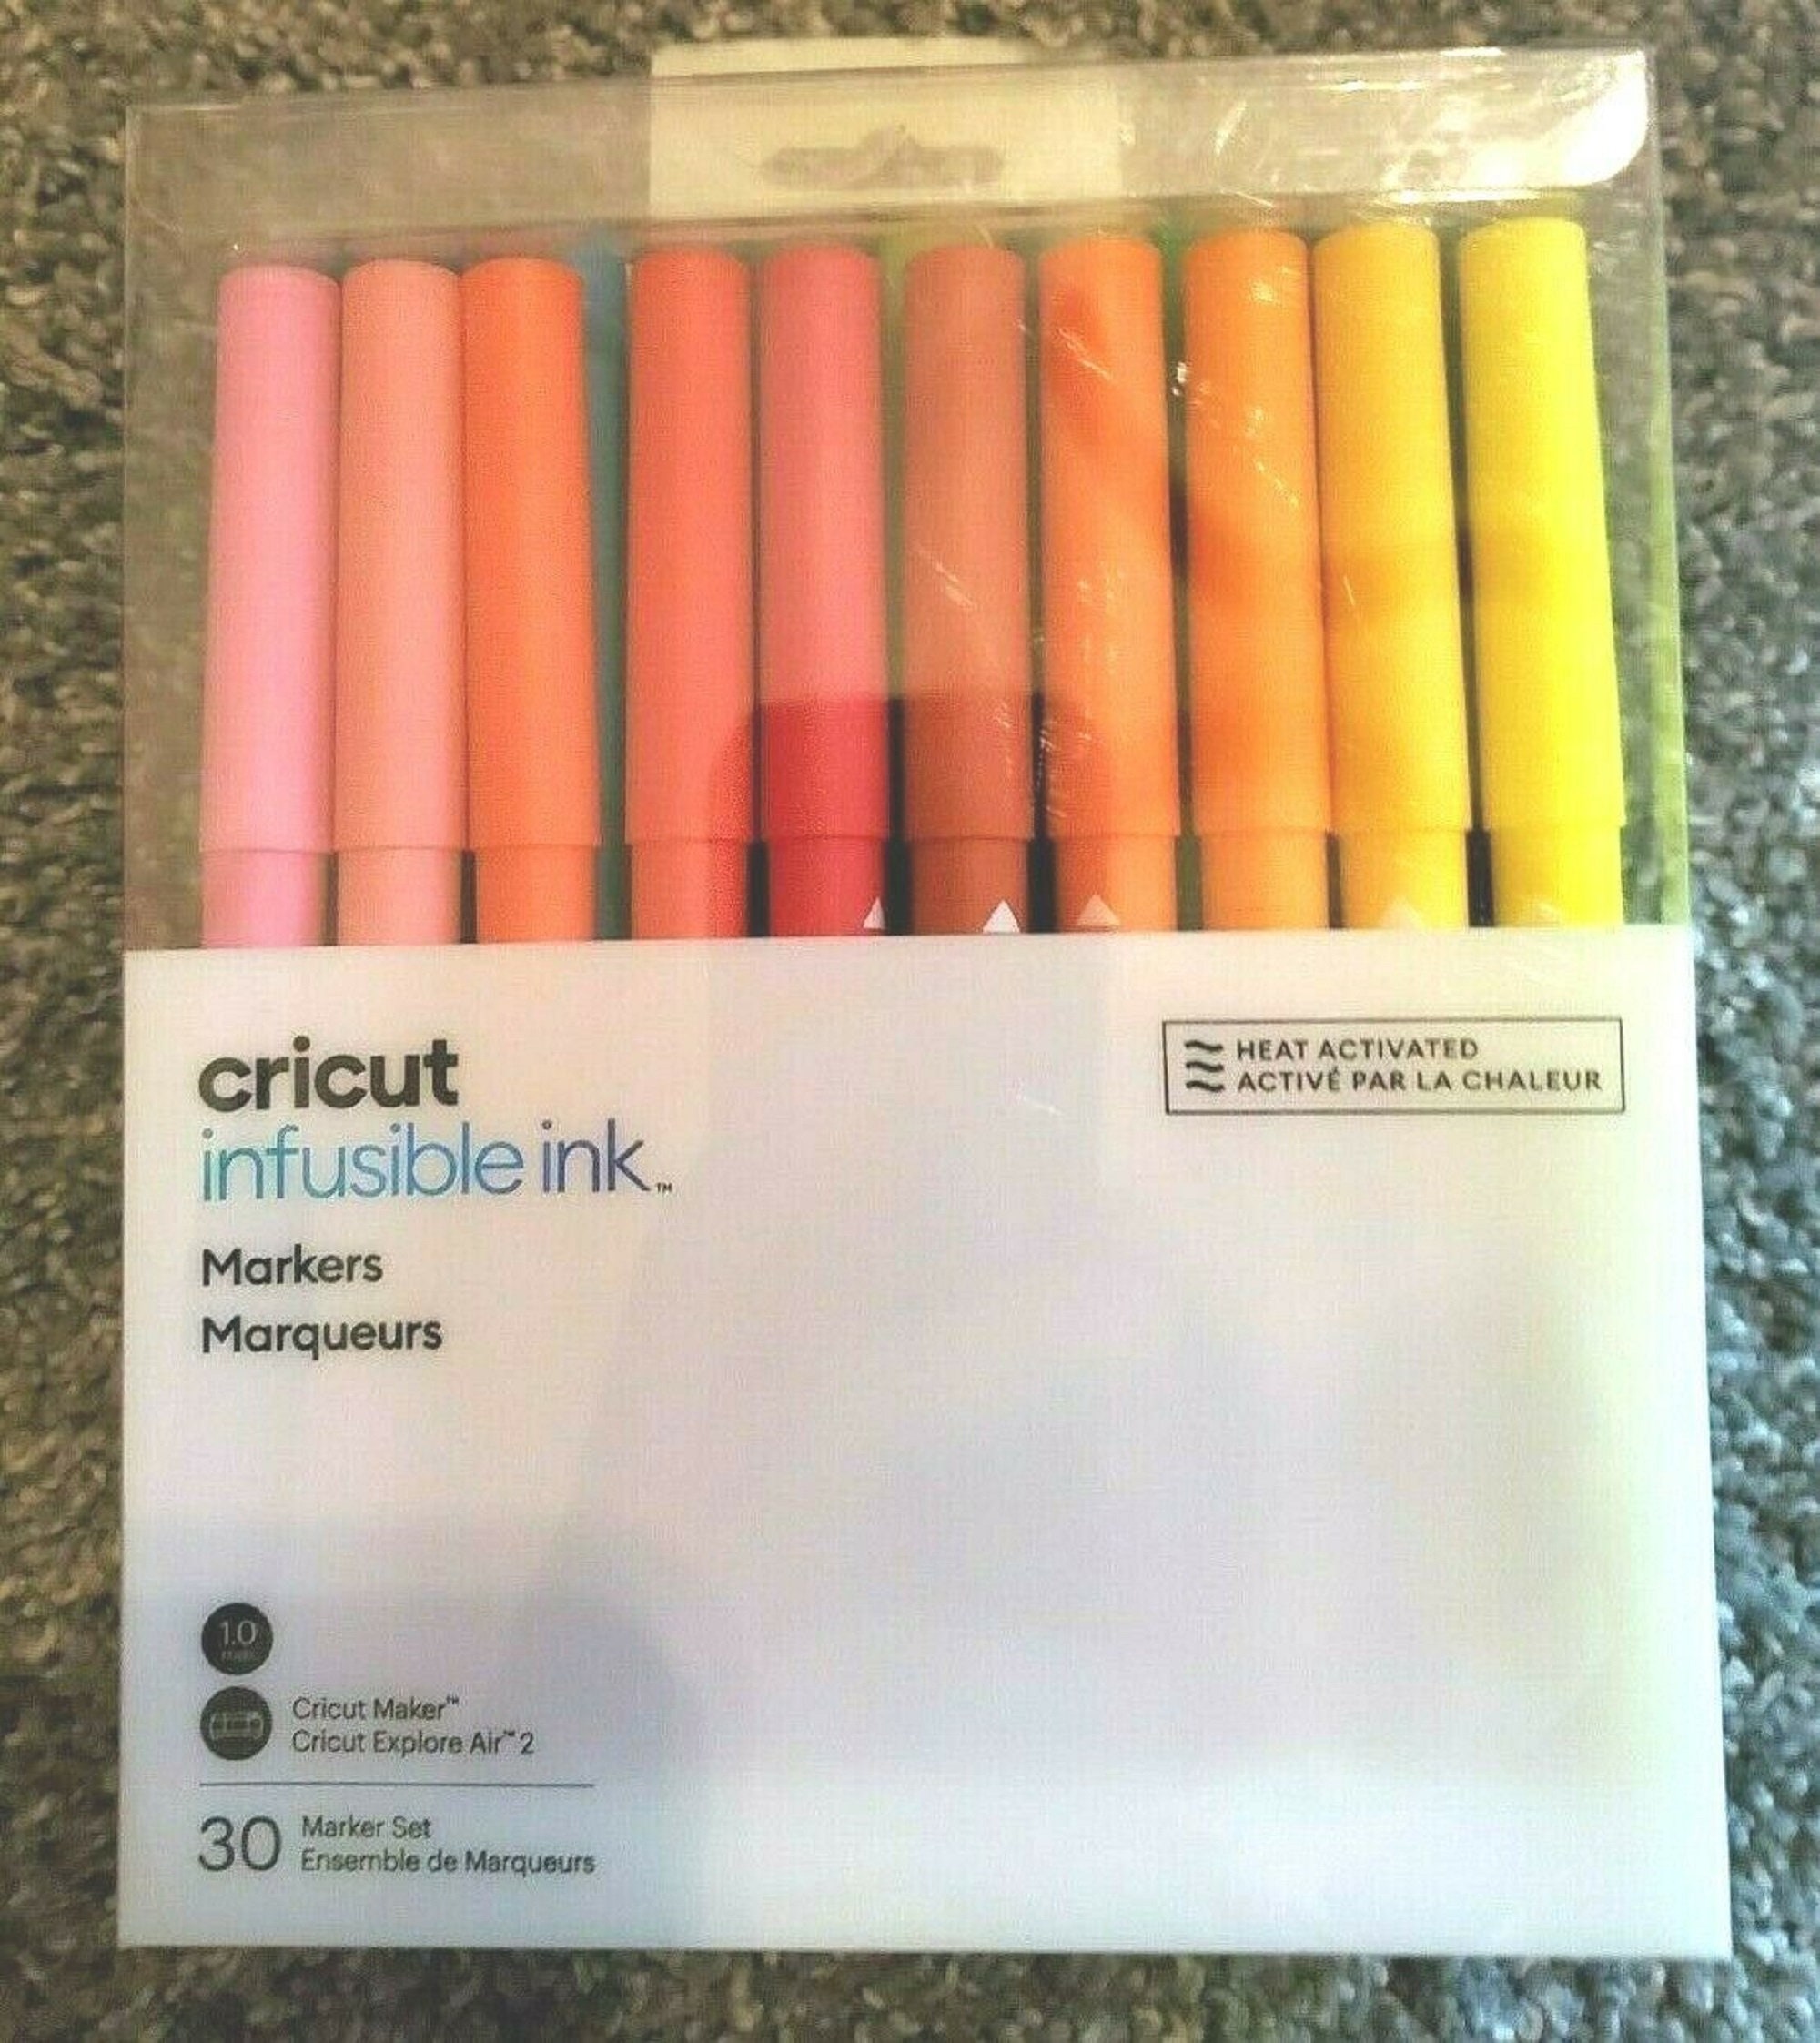 Cricut Infusible Ink Marker Set 30 Pack Explore Air 2 Maker Markers 